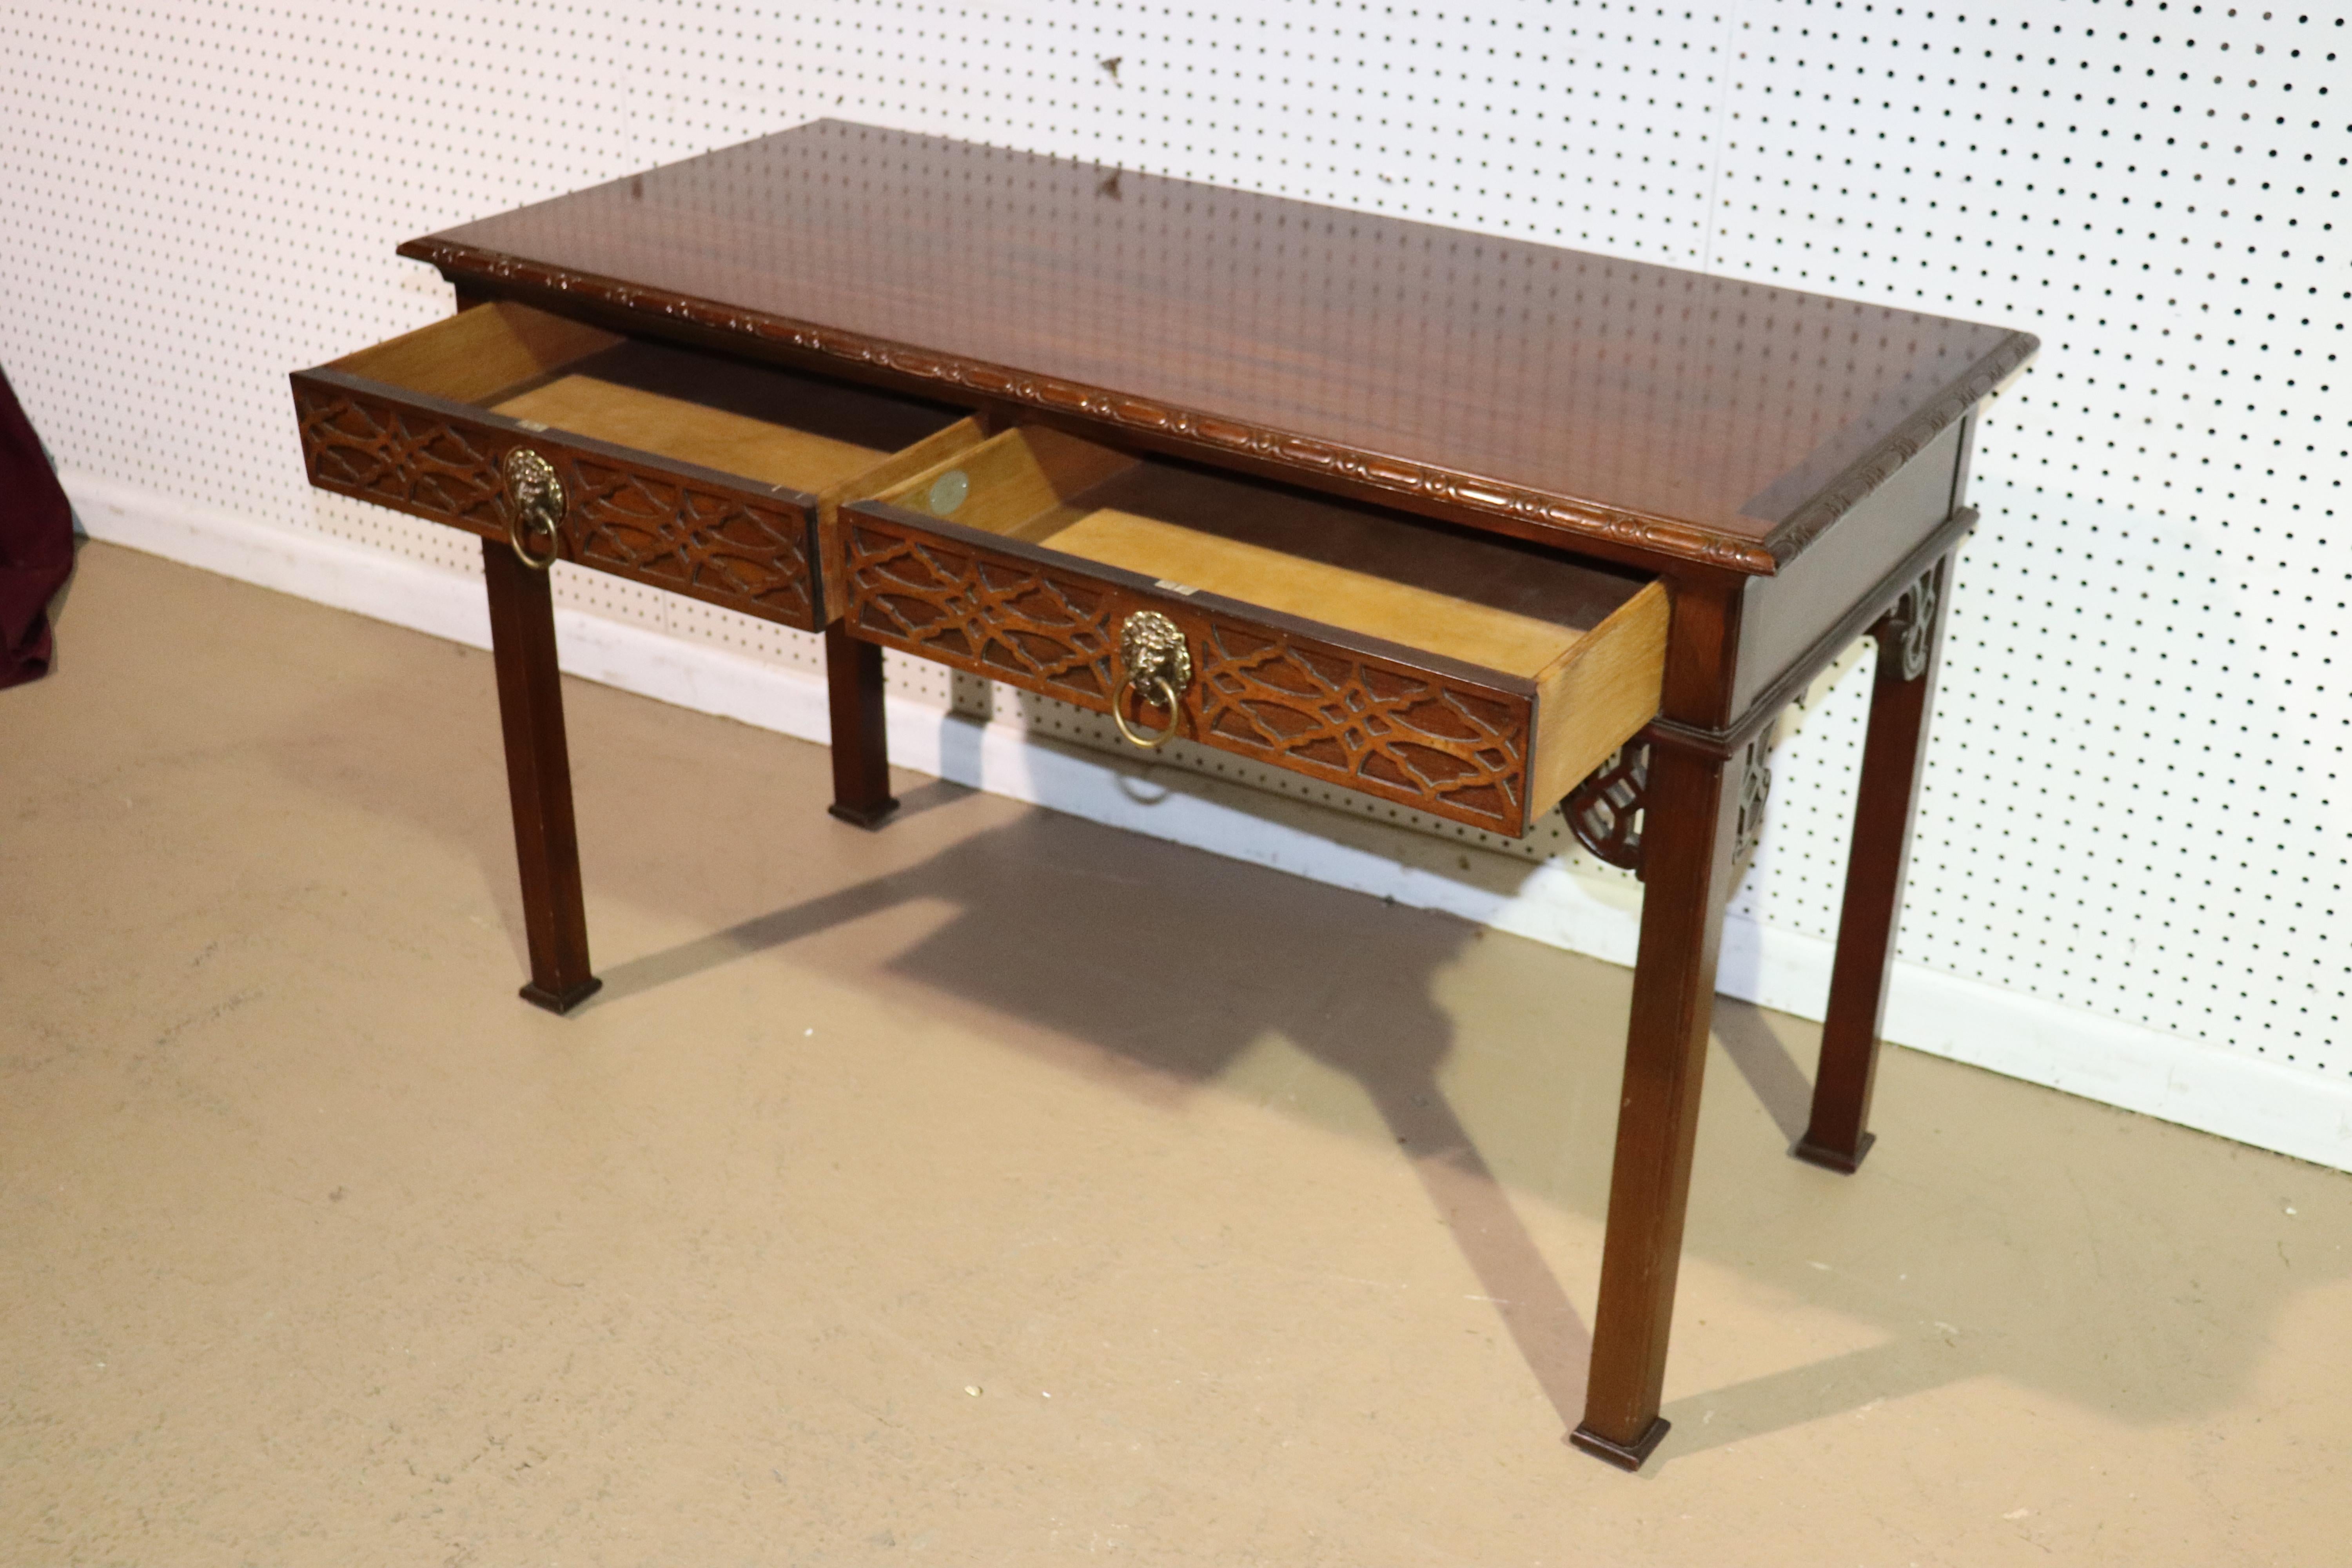 This is a fine quality desk by Baker furniture company. The desk is in very good condition with minor wear and small dings, or scratches but nothing at all obvious. The desk dates to the 1980s and measures 48 wide x 22 deep x 30 inches tall.